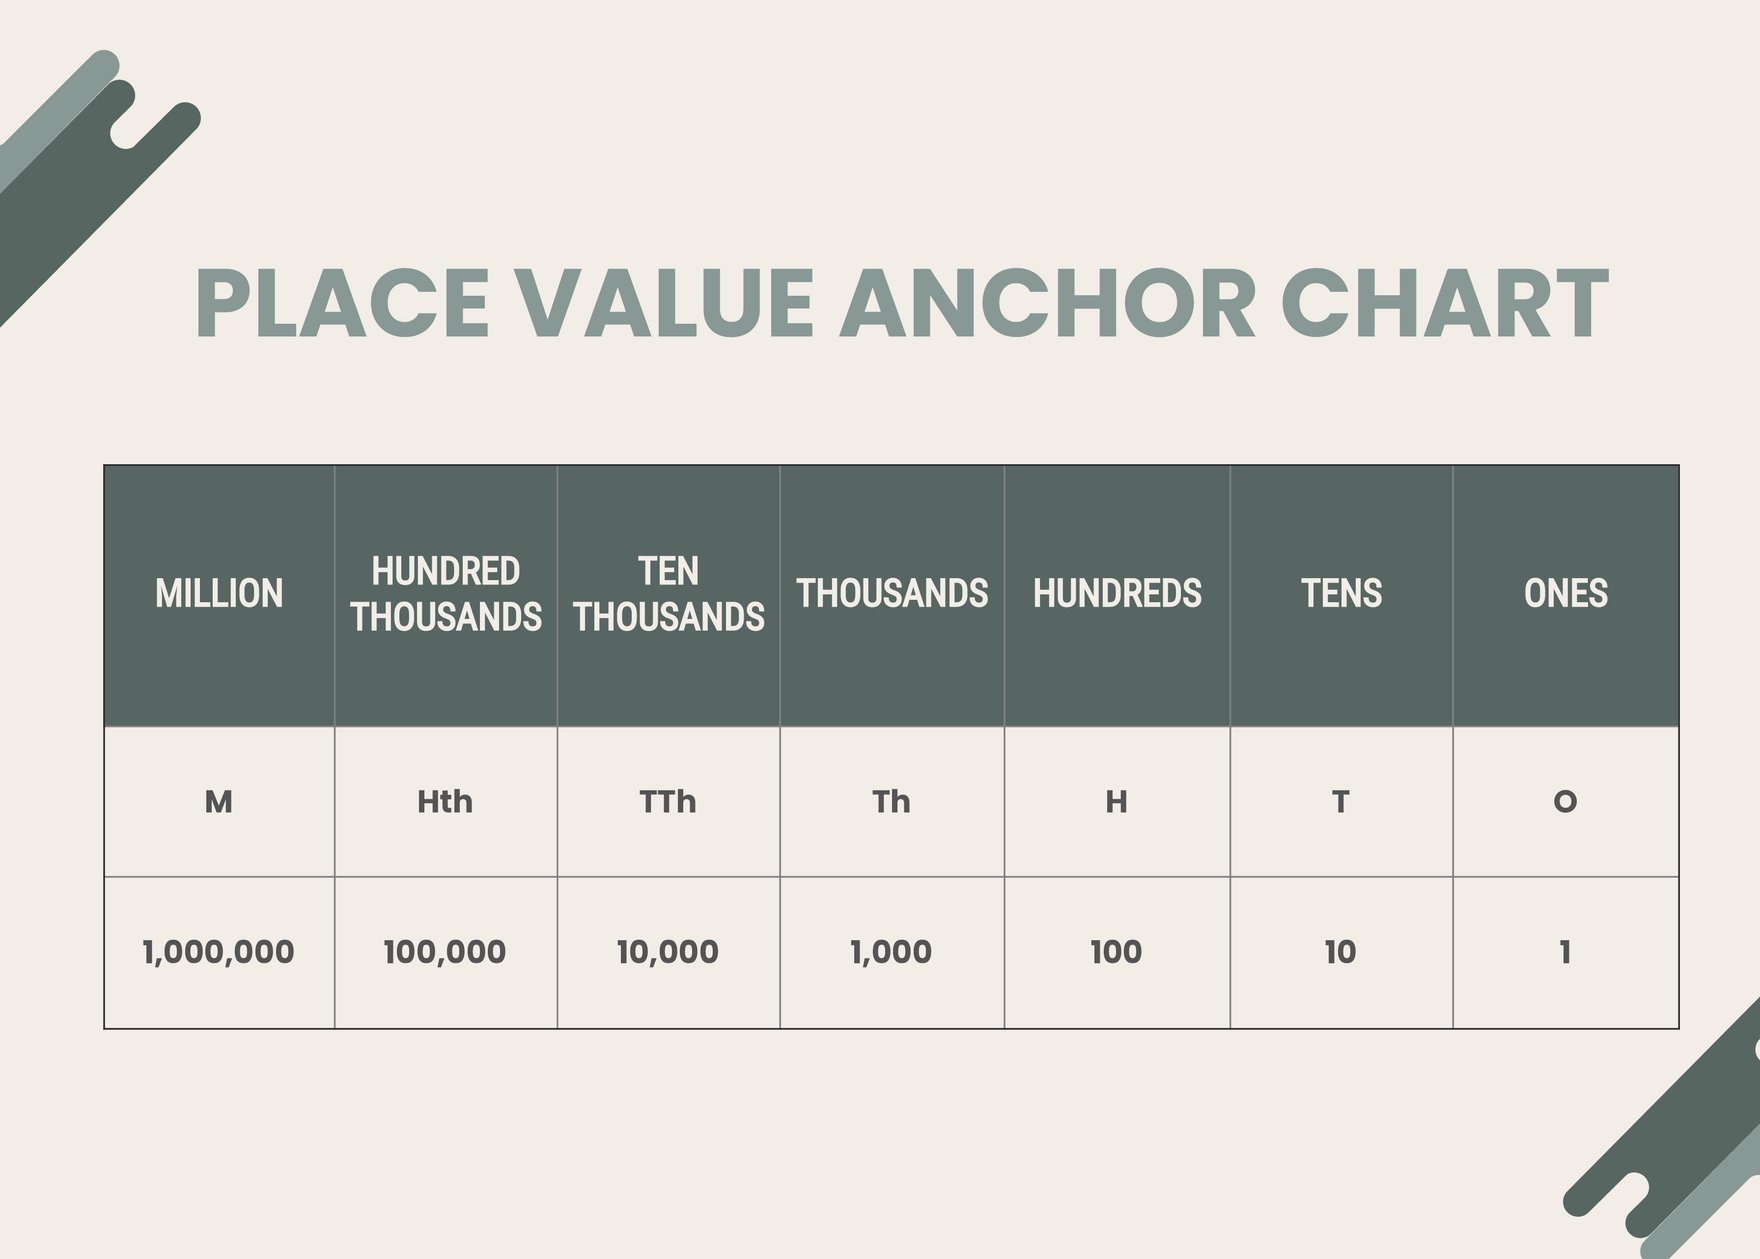 Place Value Anchor Chart in PDF, Illustrator